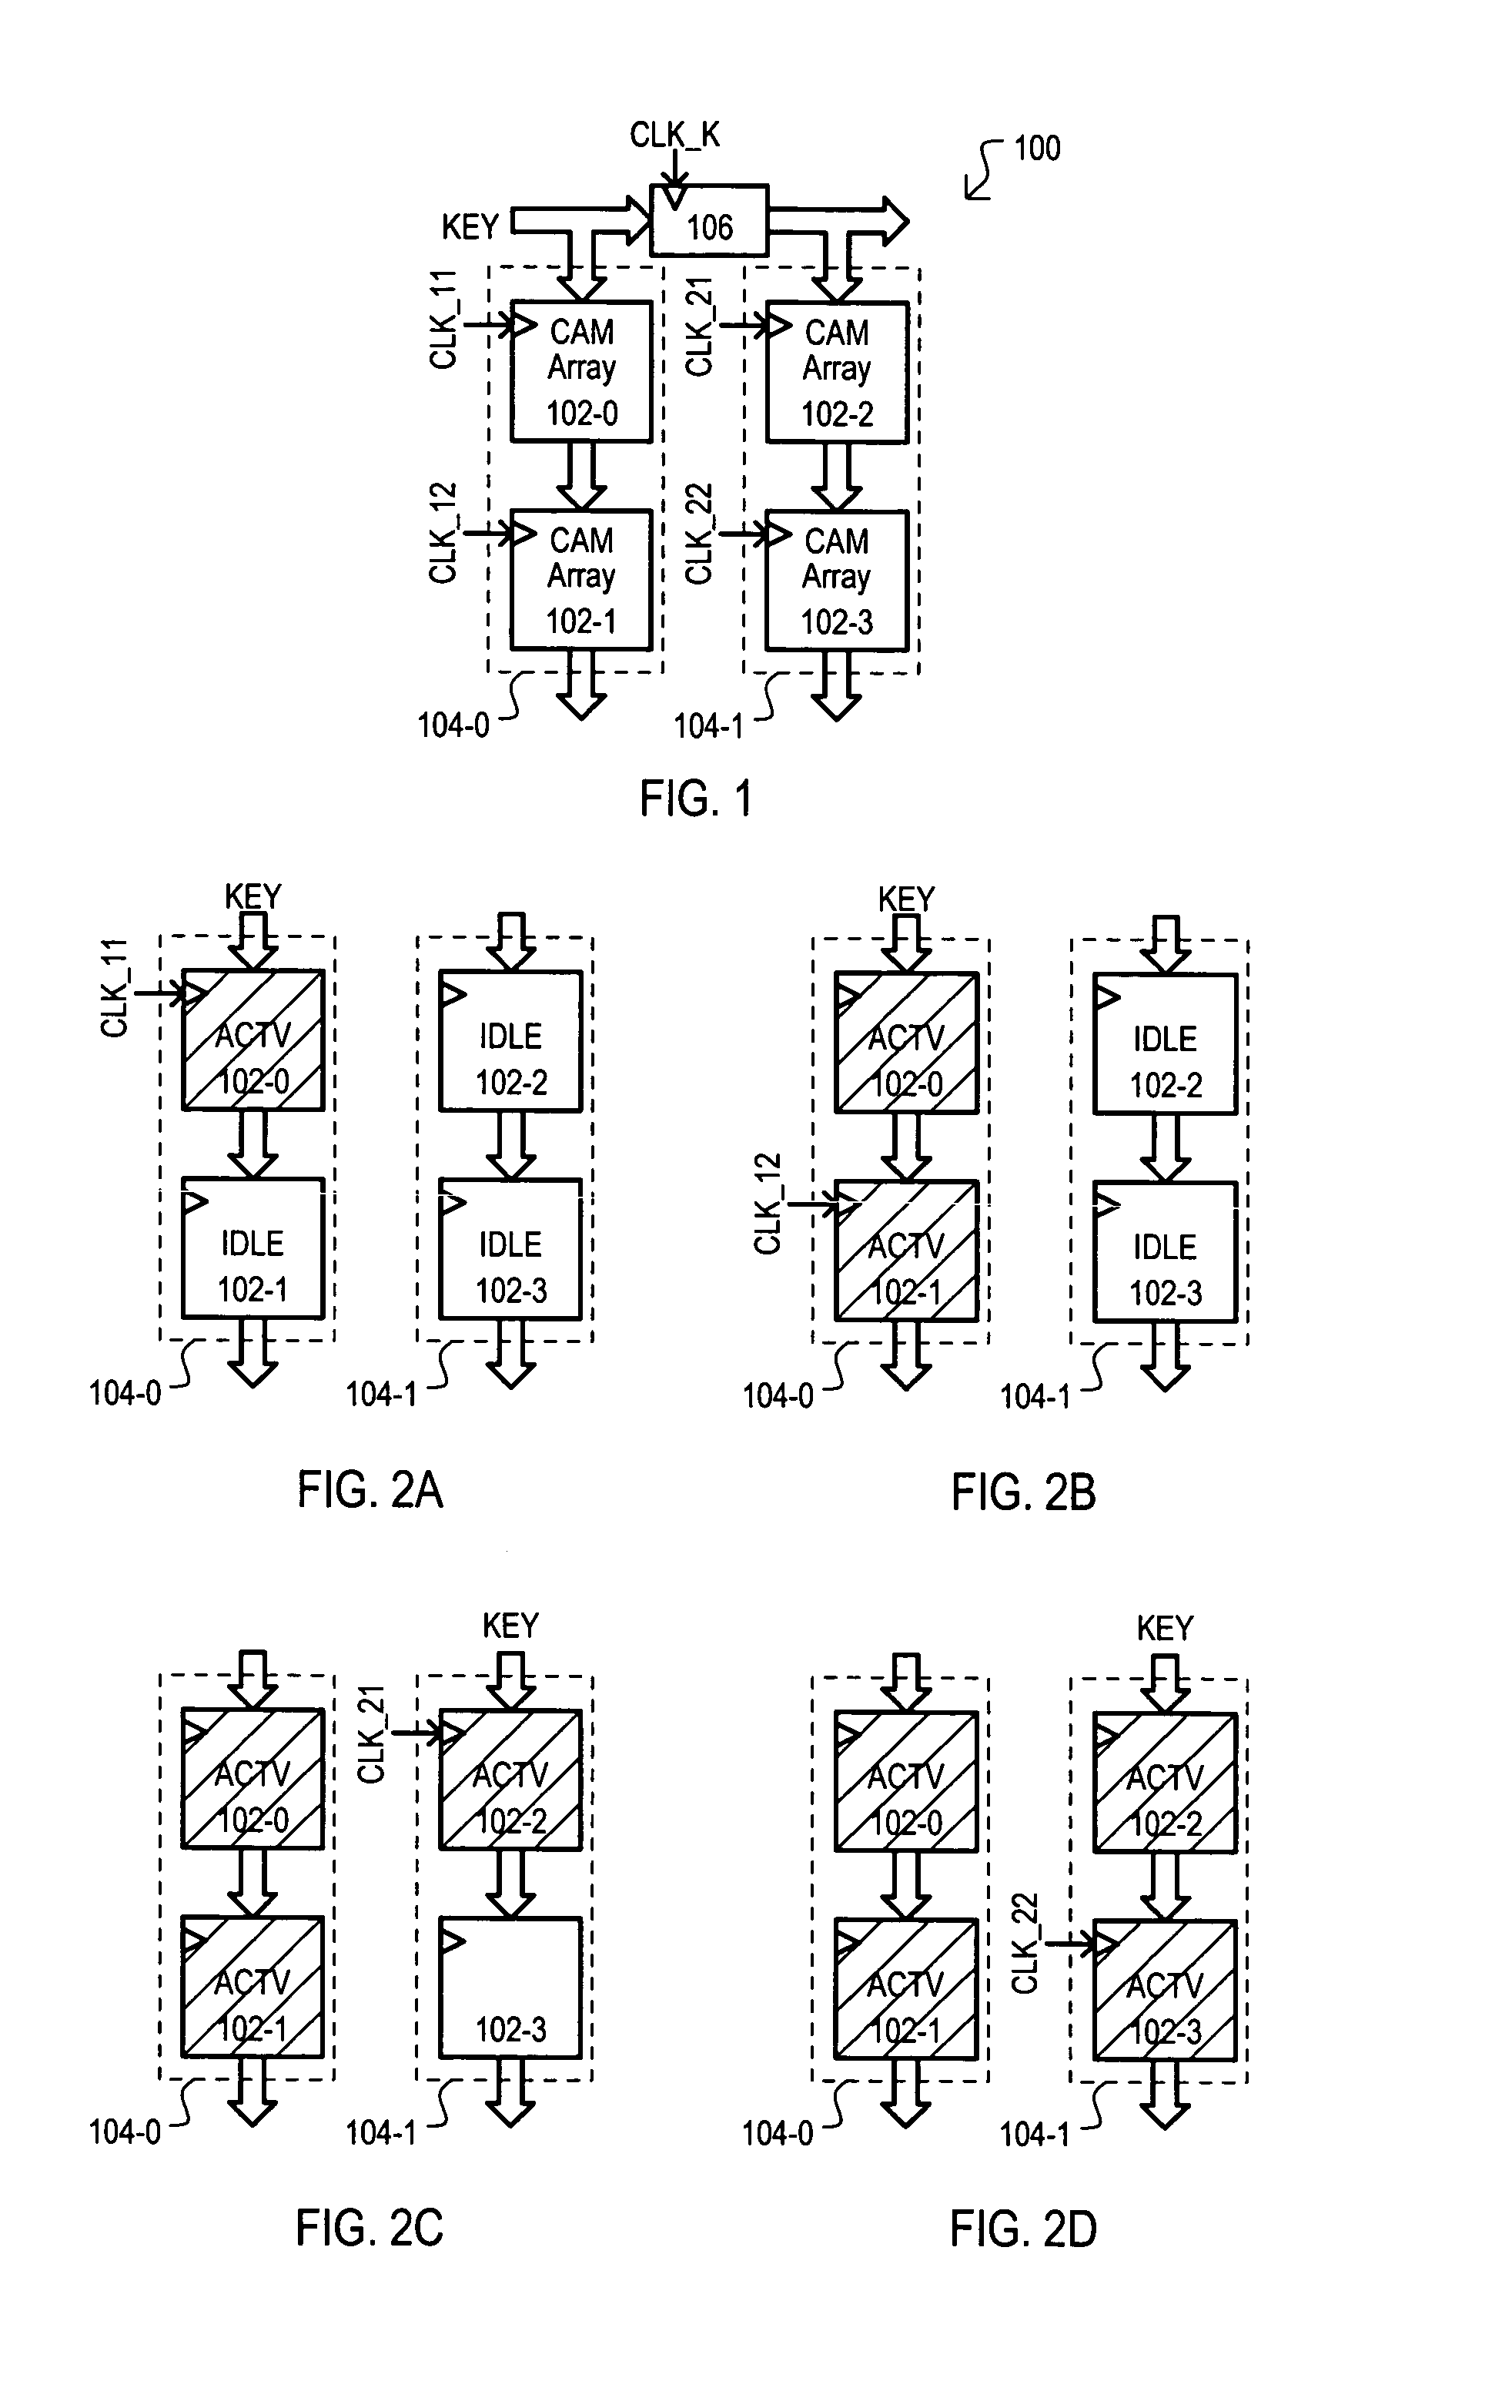 Reduced turn-on current content addressable memory (CAM) device and method